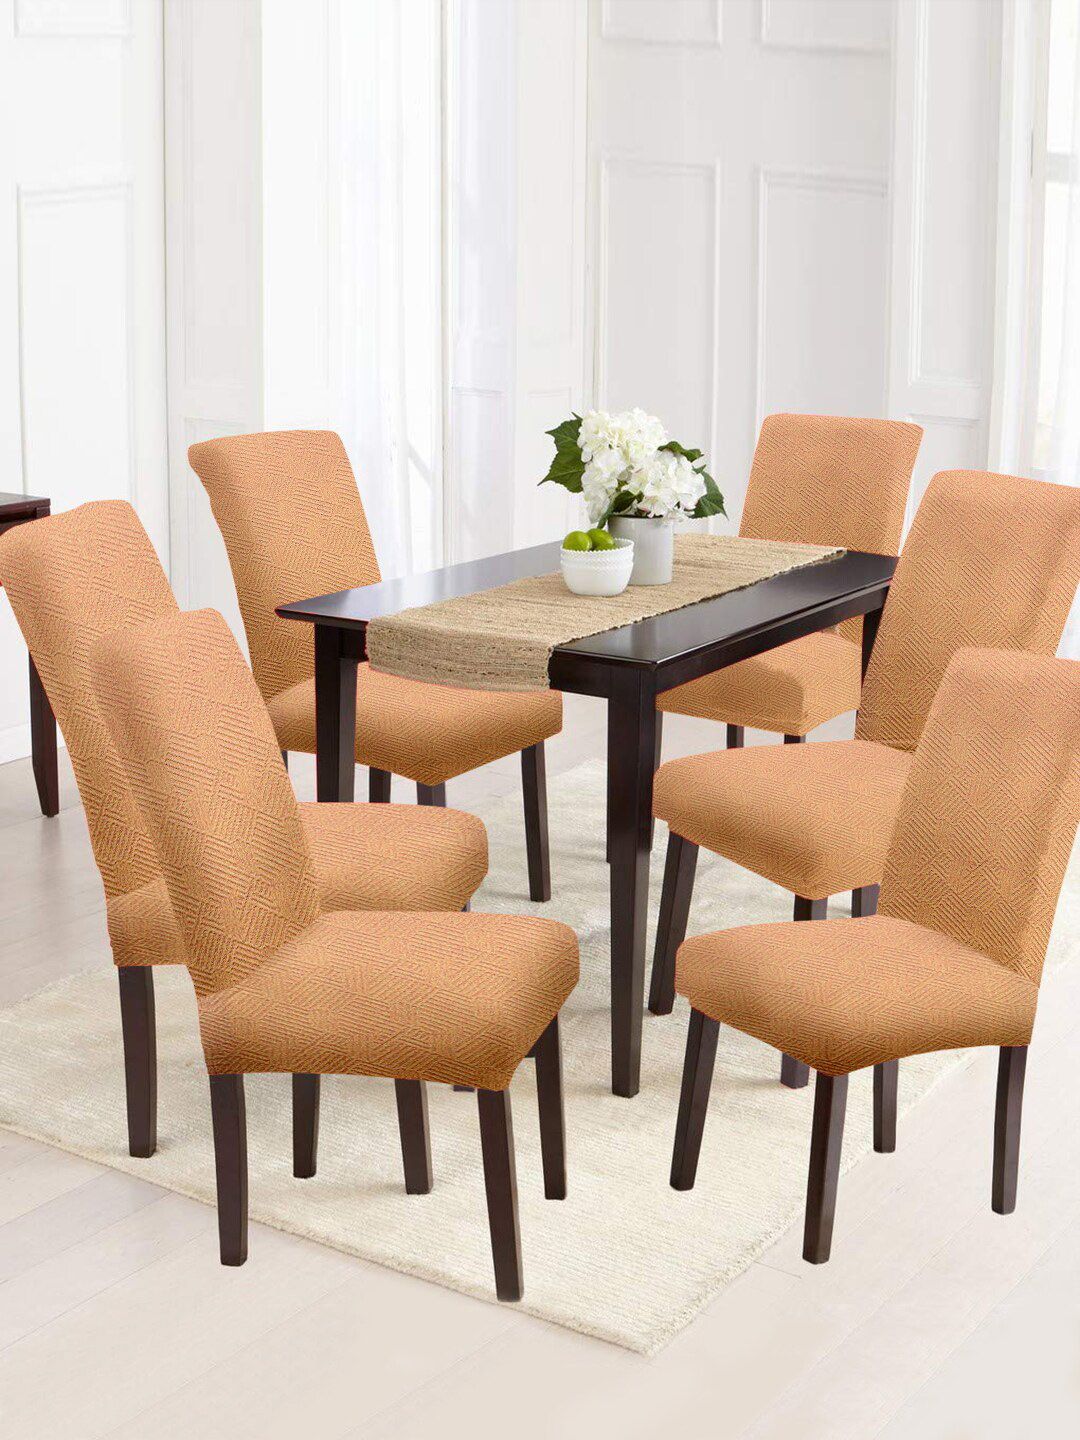 Cortina Unisex Set Of 6 Beige Textured Chair Covers Price in India